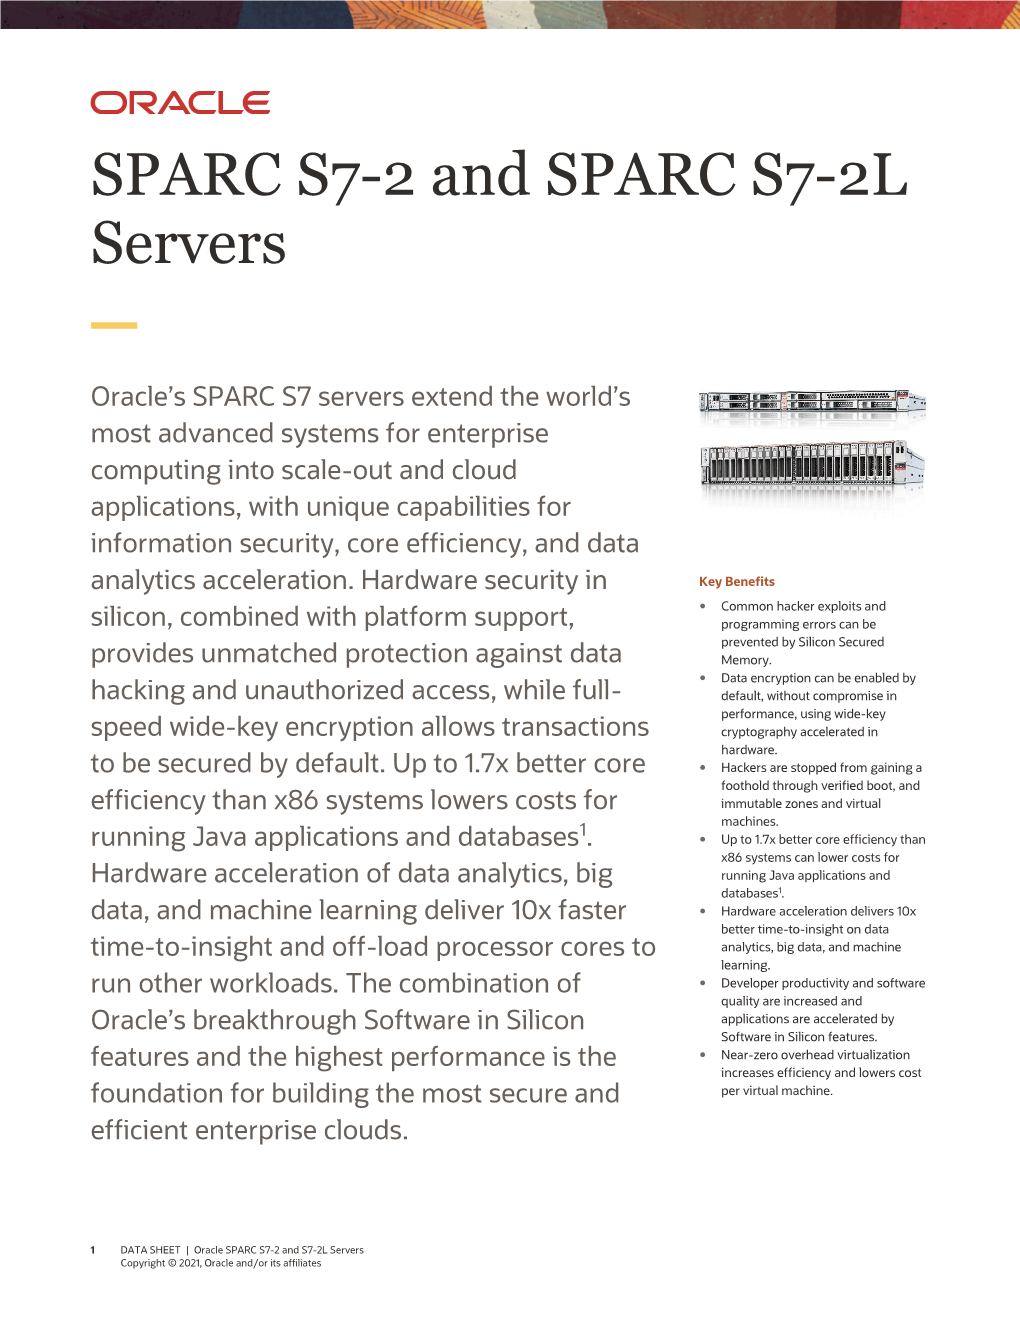 SPARC S7-2 and S7-2L Servers Copyright © 2021, Oracle And/Or Its Affiliates